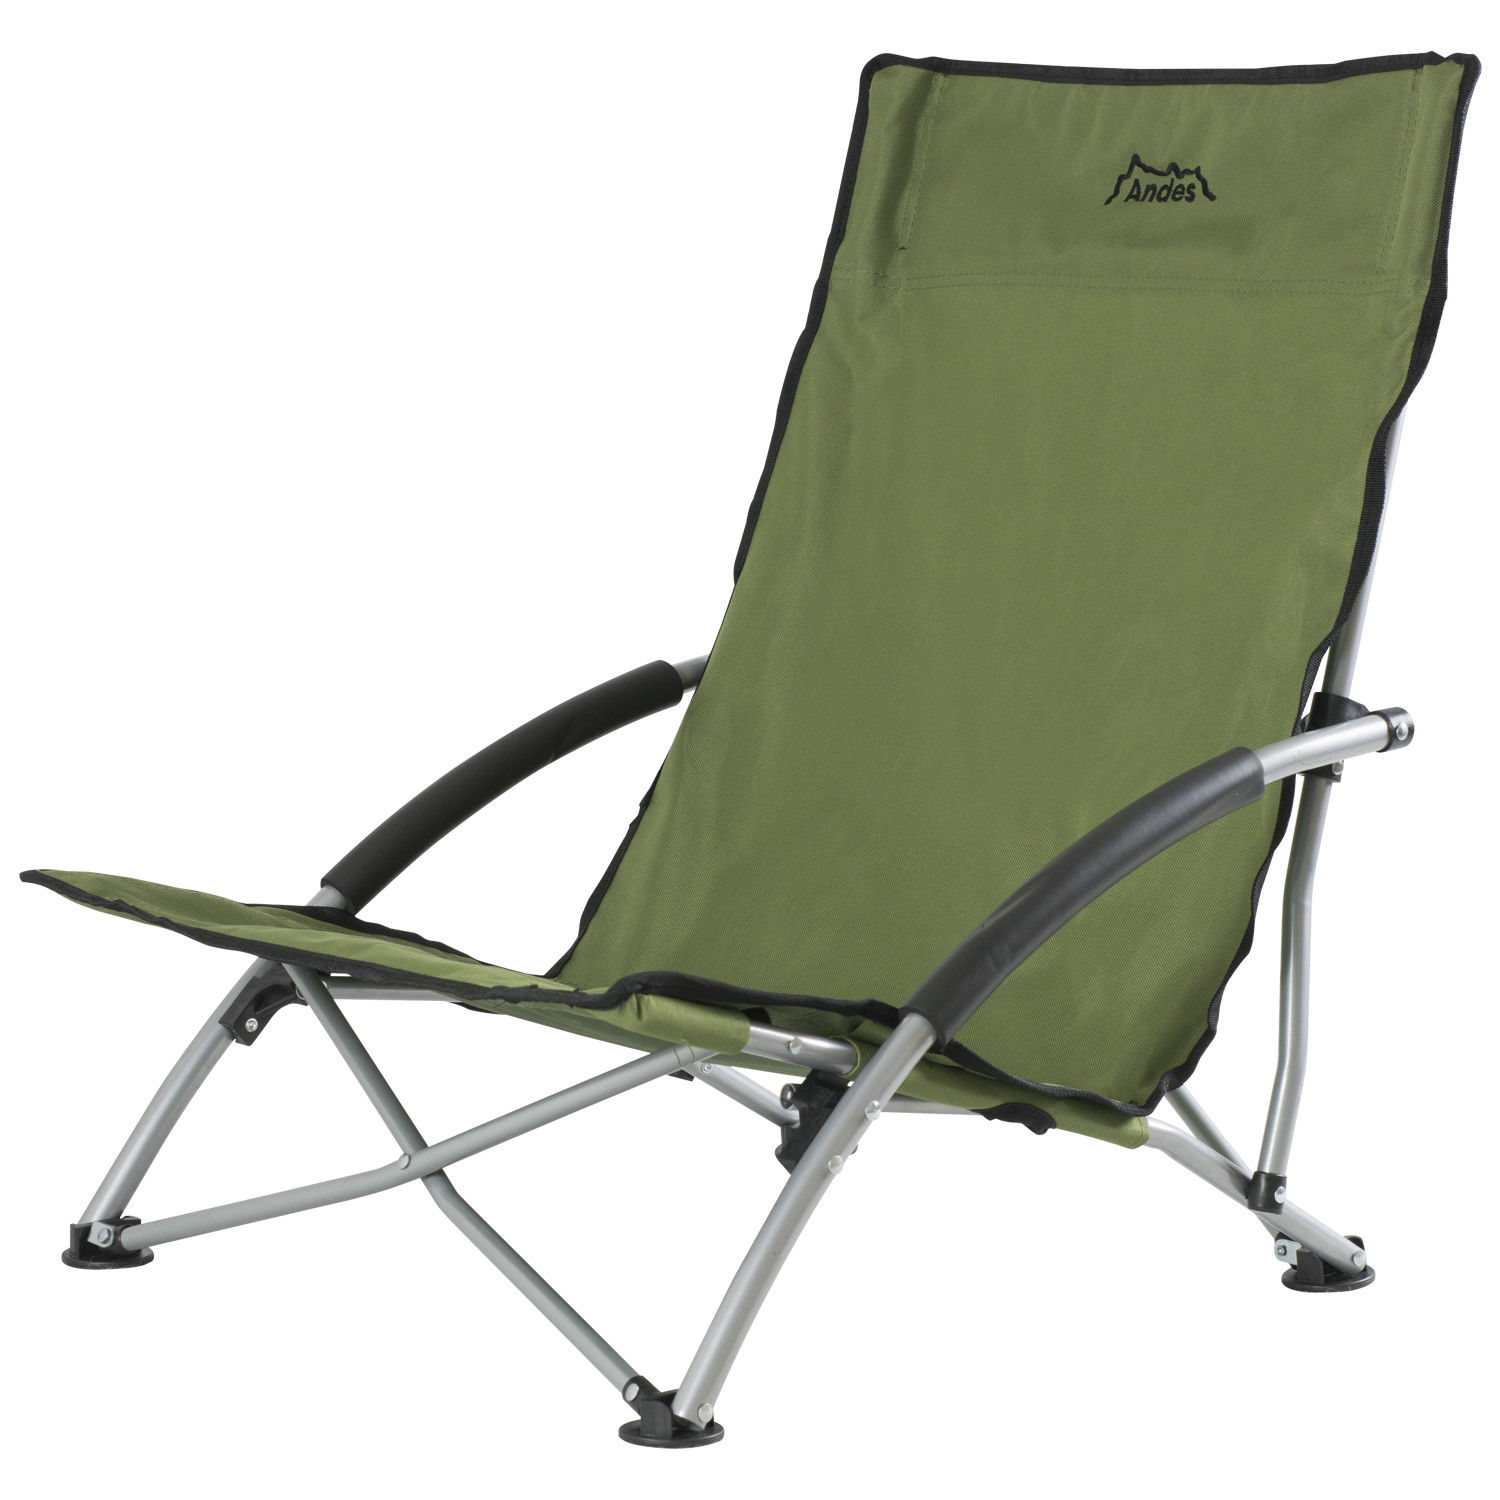 Andes Low Folding Beach/Fishing/Camping Deck Chair Outdoor Garden